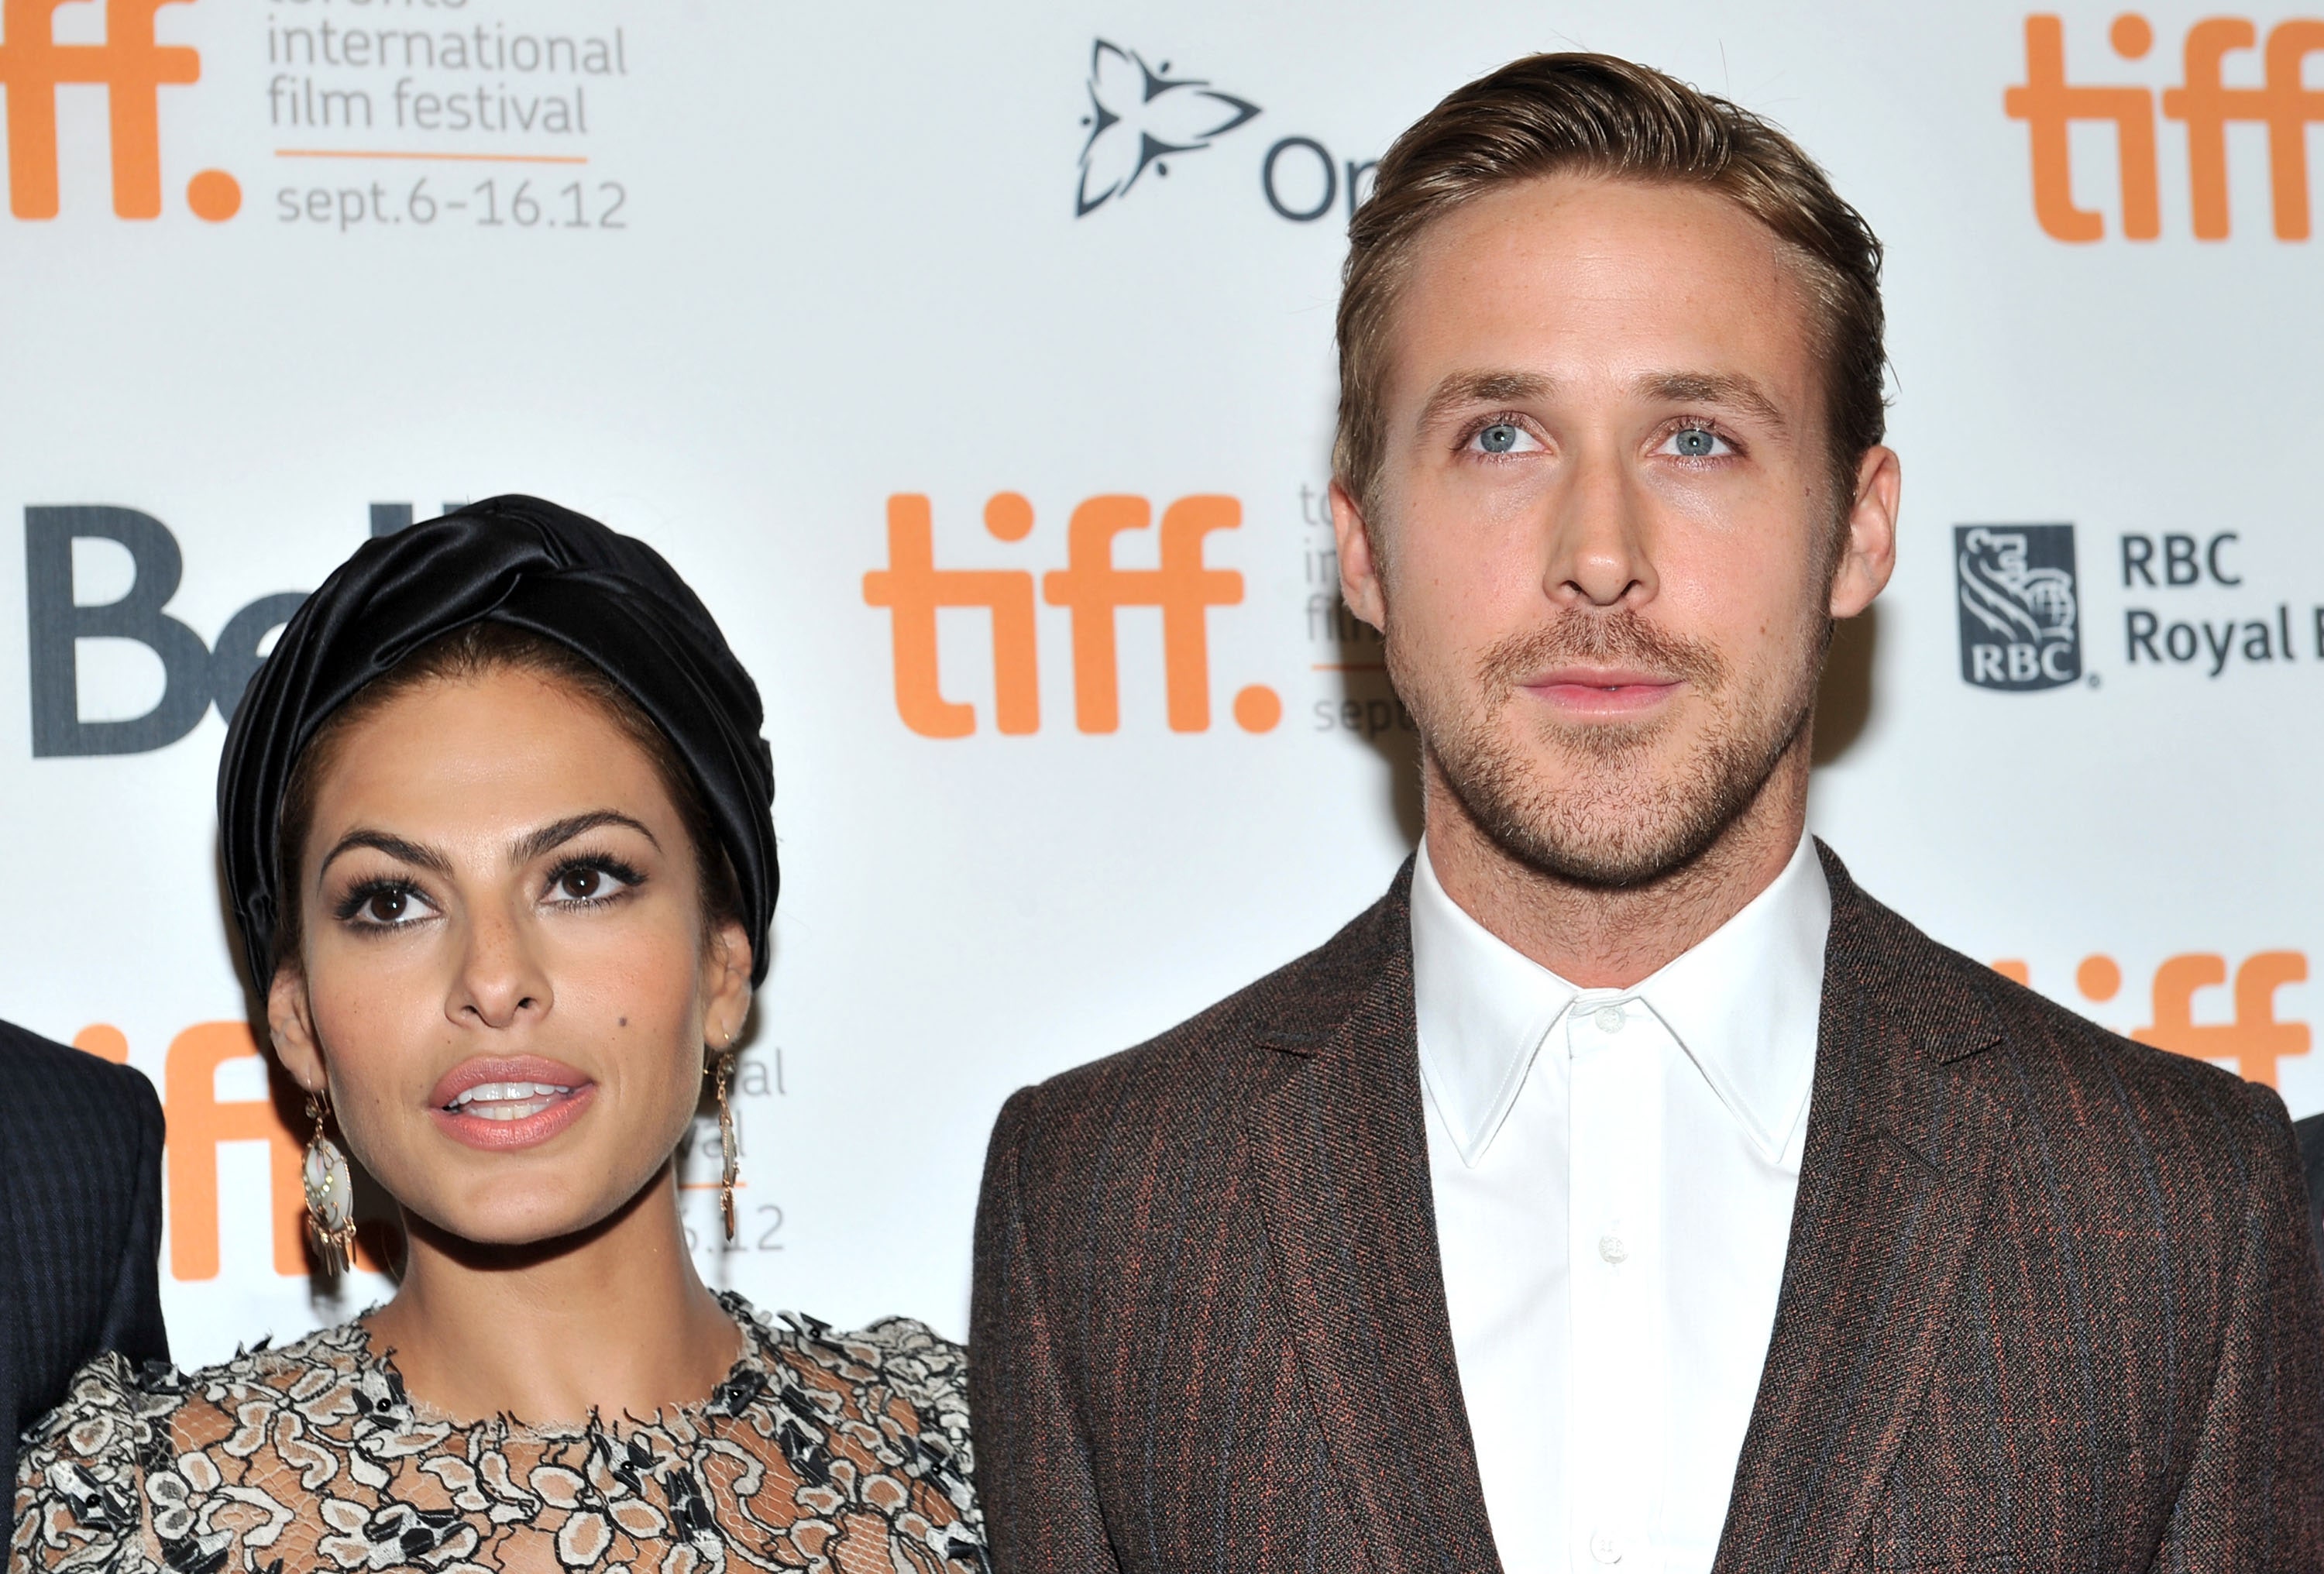 Eva Mendes and Ryan Gosling are rarely photographed together, but were snapped on the red carpet at the premiere of their 2012 film *The Place Beyond The Pines*.